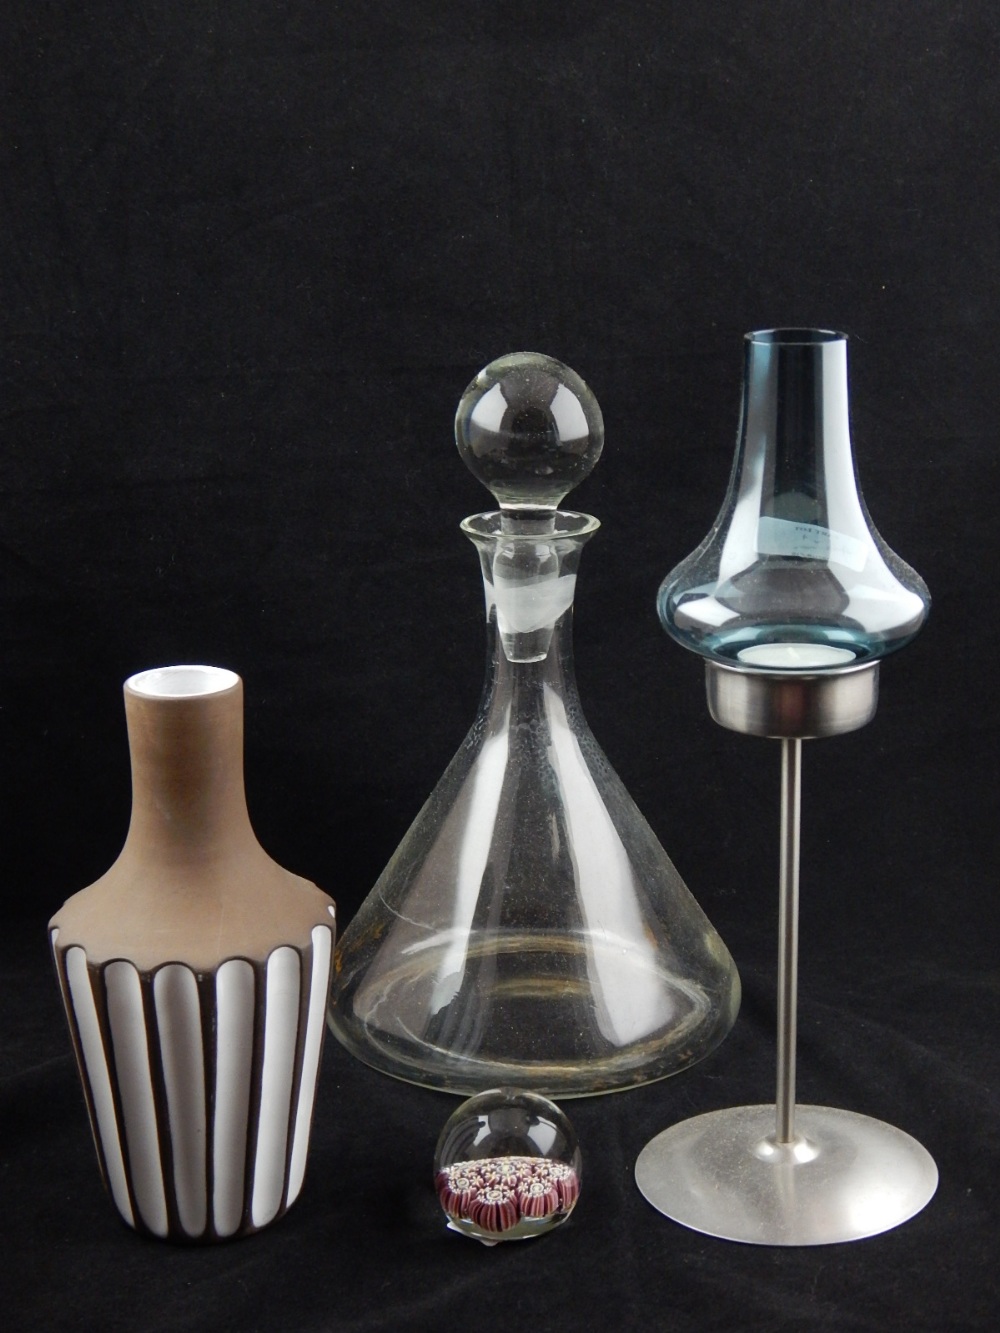 A 21st century glass decanter and stopper, together with a candleholder with glass cover, a paper